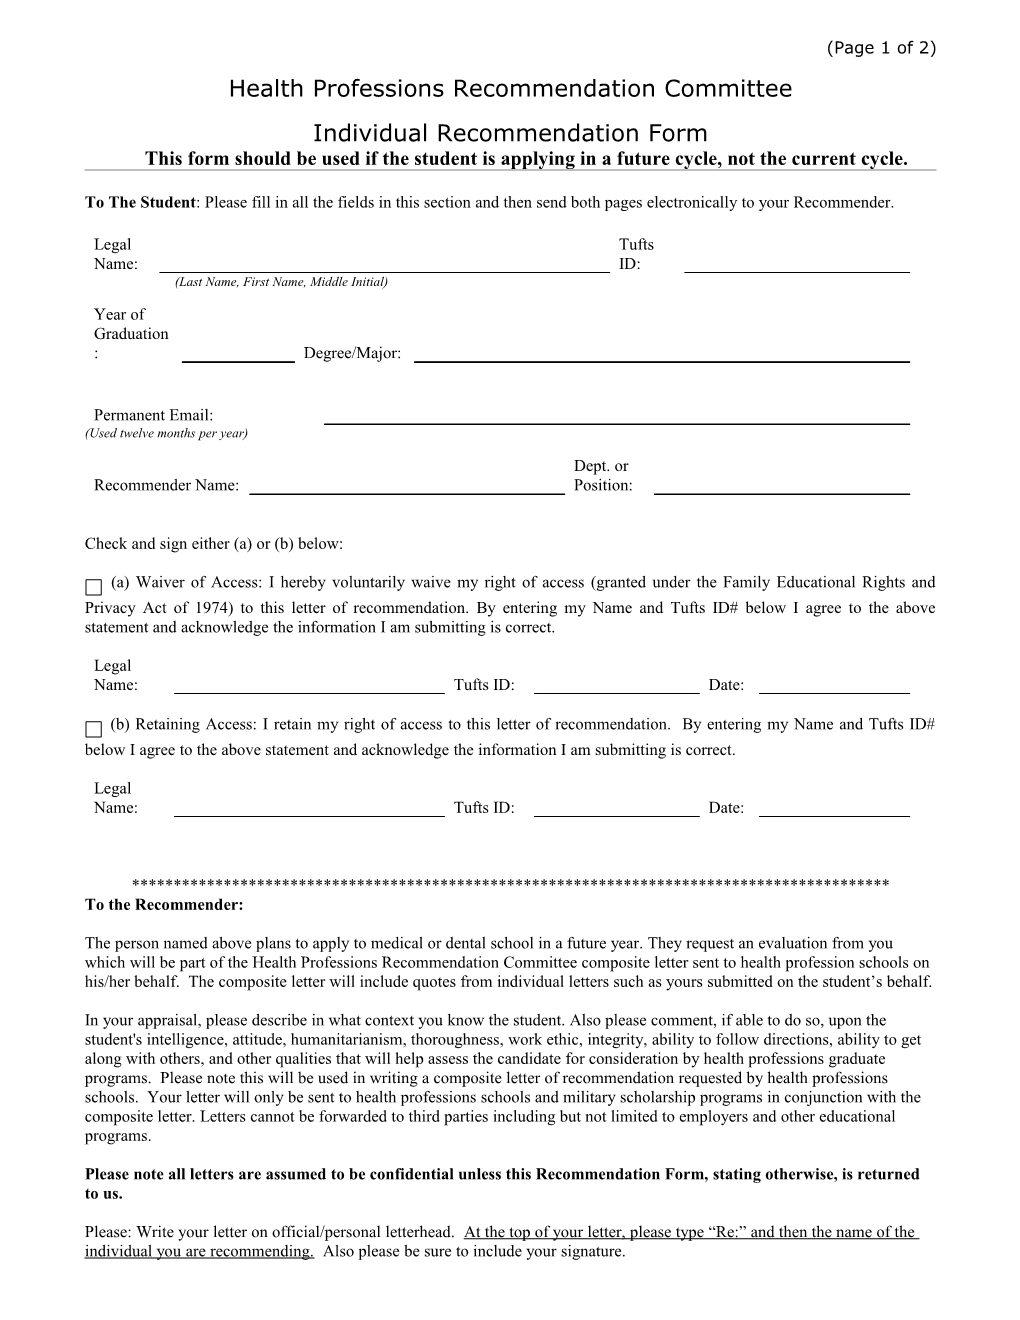 Individual Recommendation Form